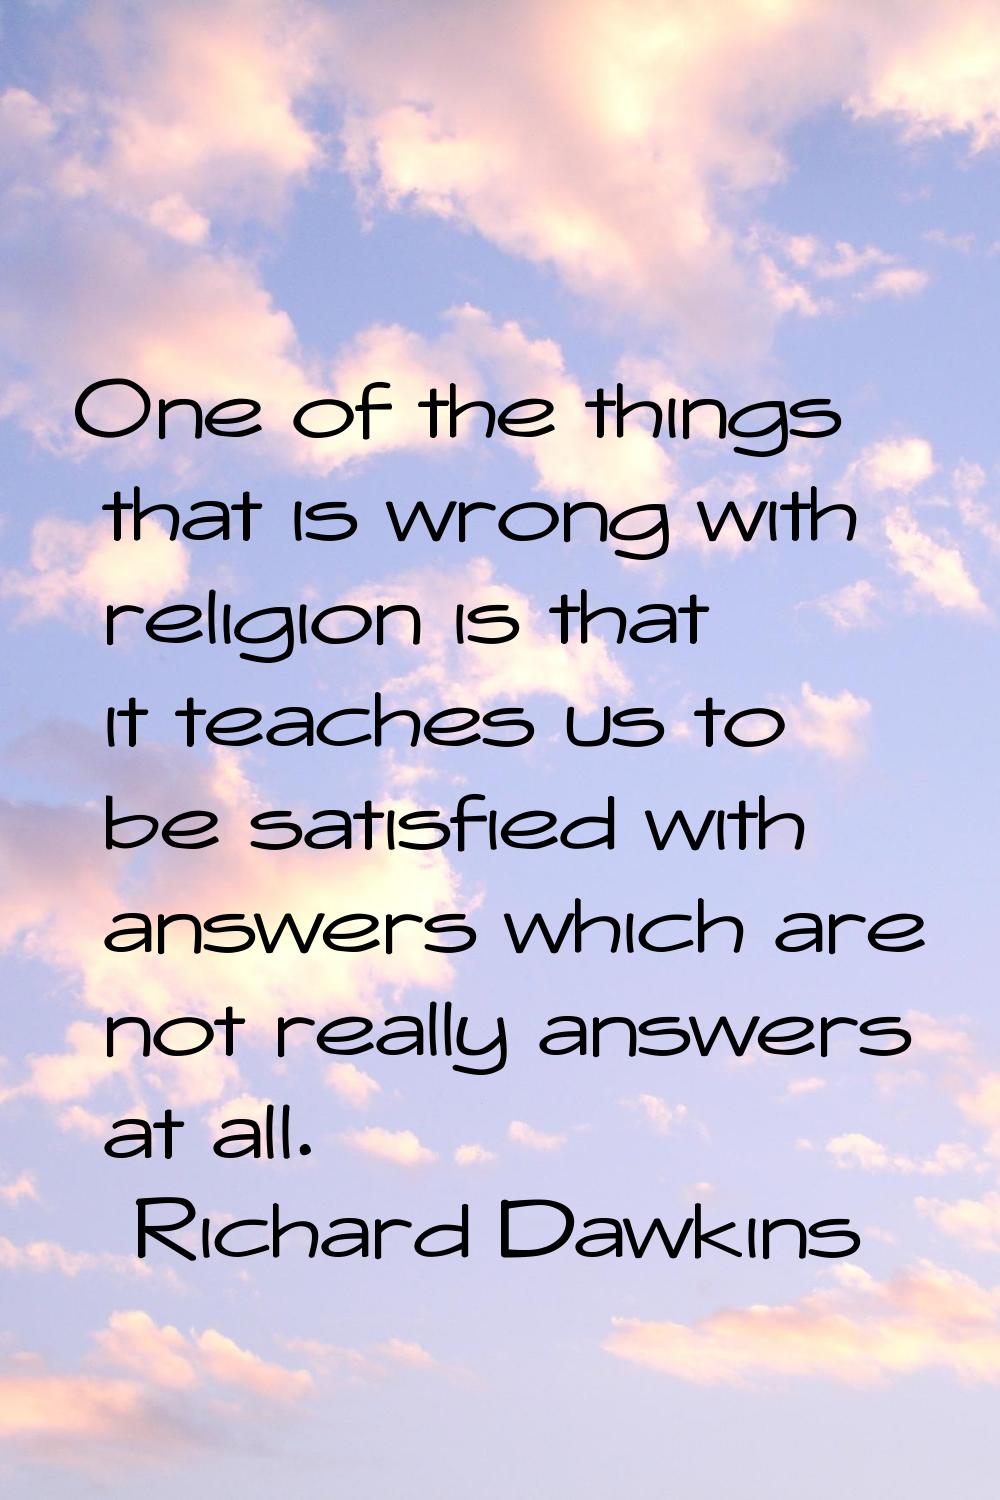 One of the things that is wrong with religion is that it teaches us to be satisfied with answers wh